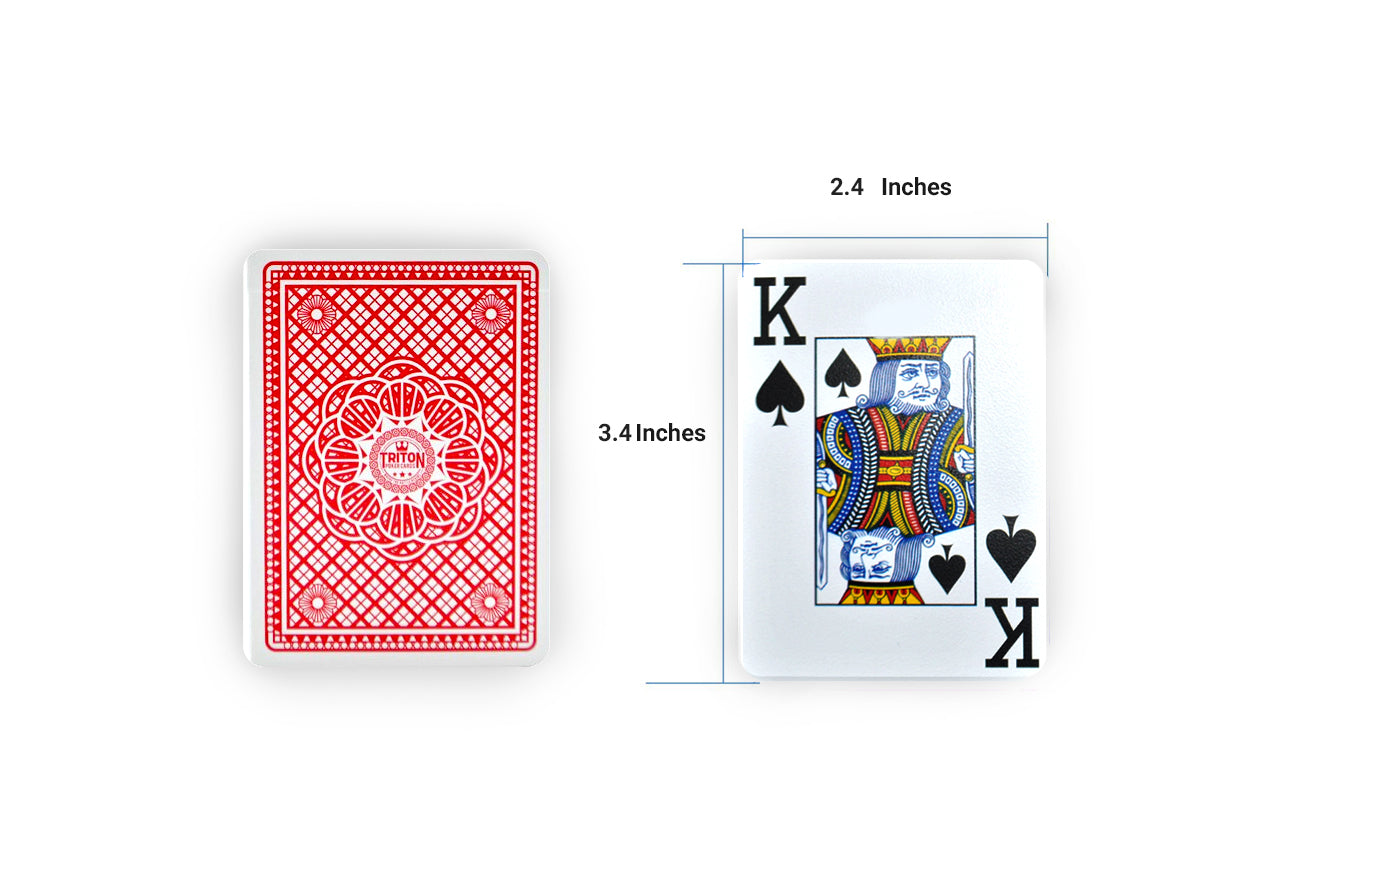 TRITON POKER TABLES PREMIUM POKER PLAYING CARDS WITH CUT CARD-SET OF 1